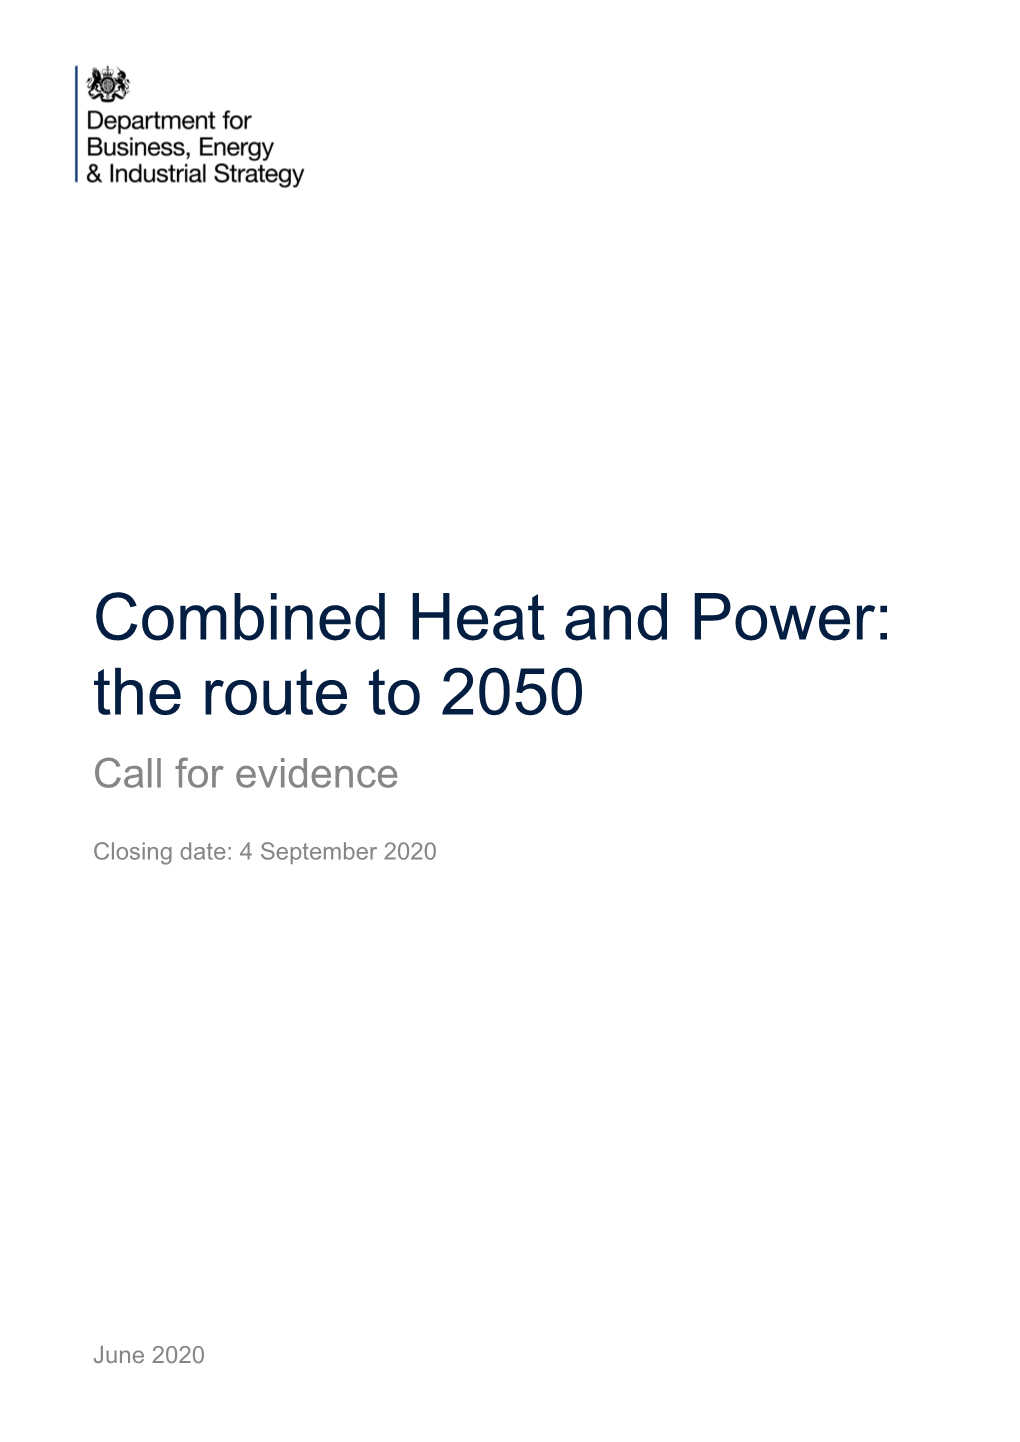 Combined Heat and Power (CHP): the Route to 2050